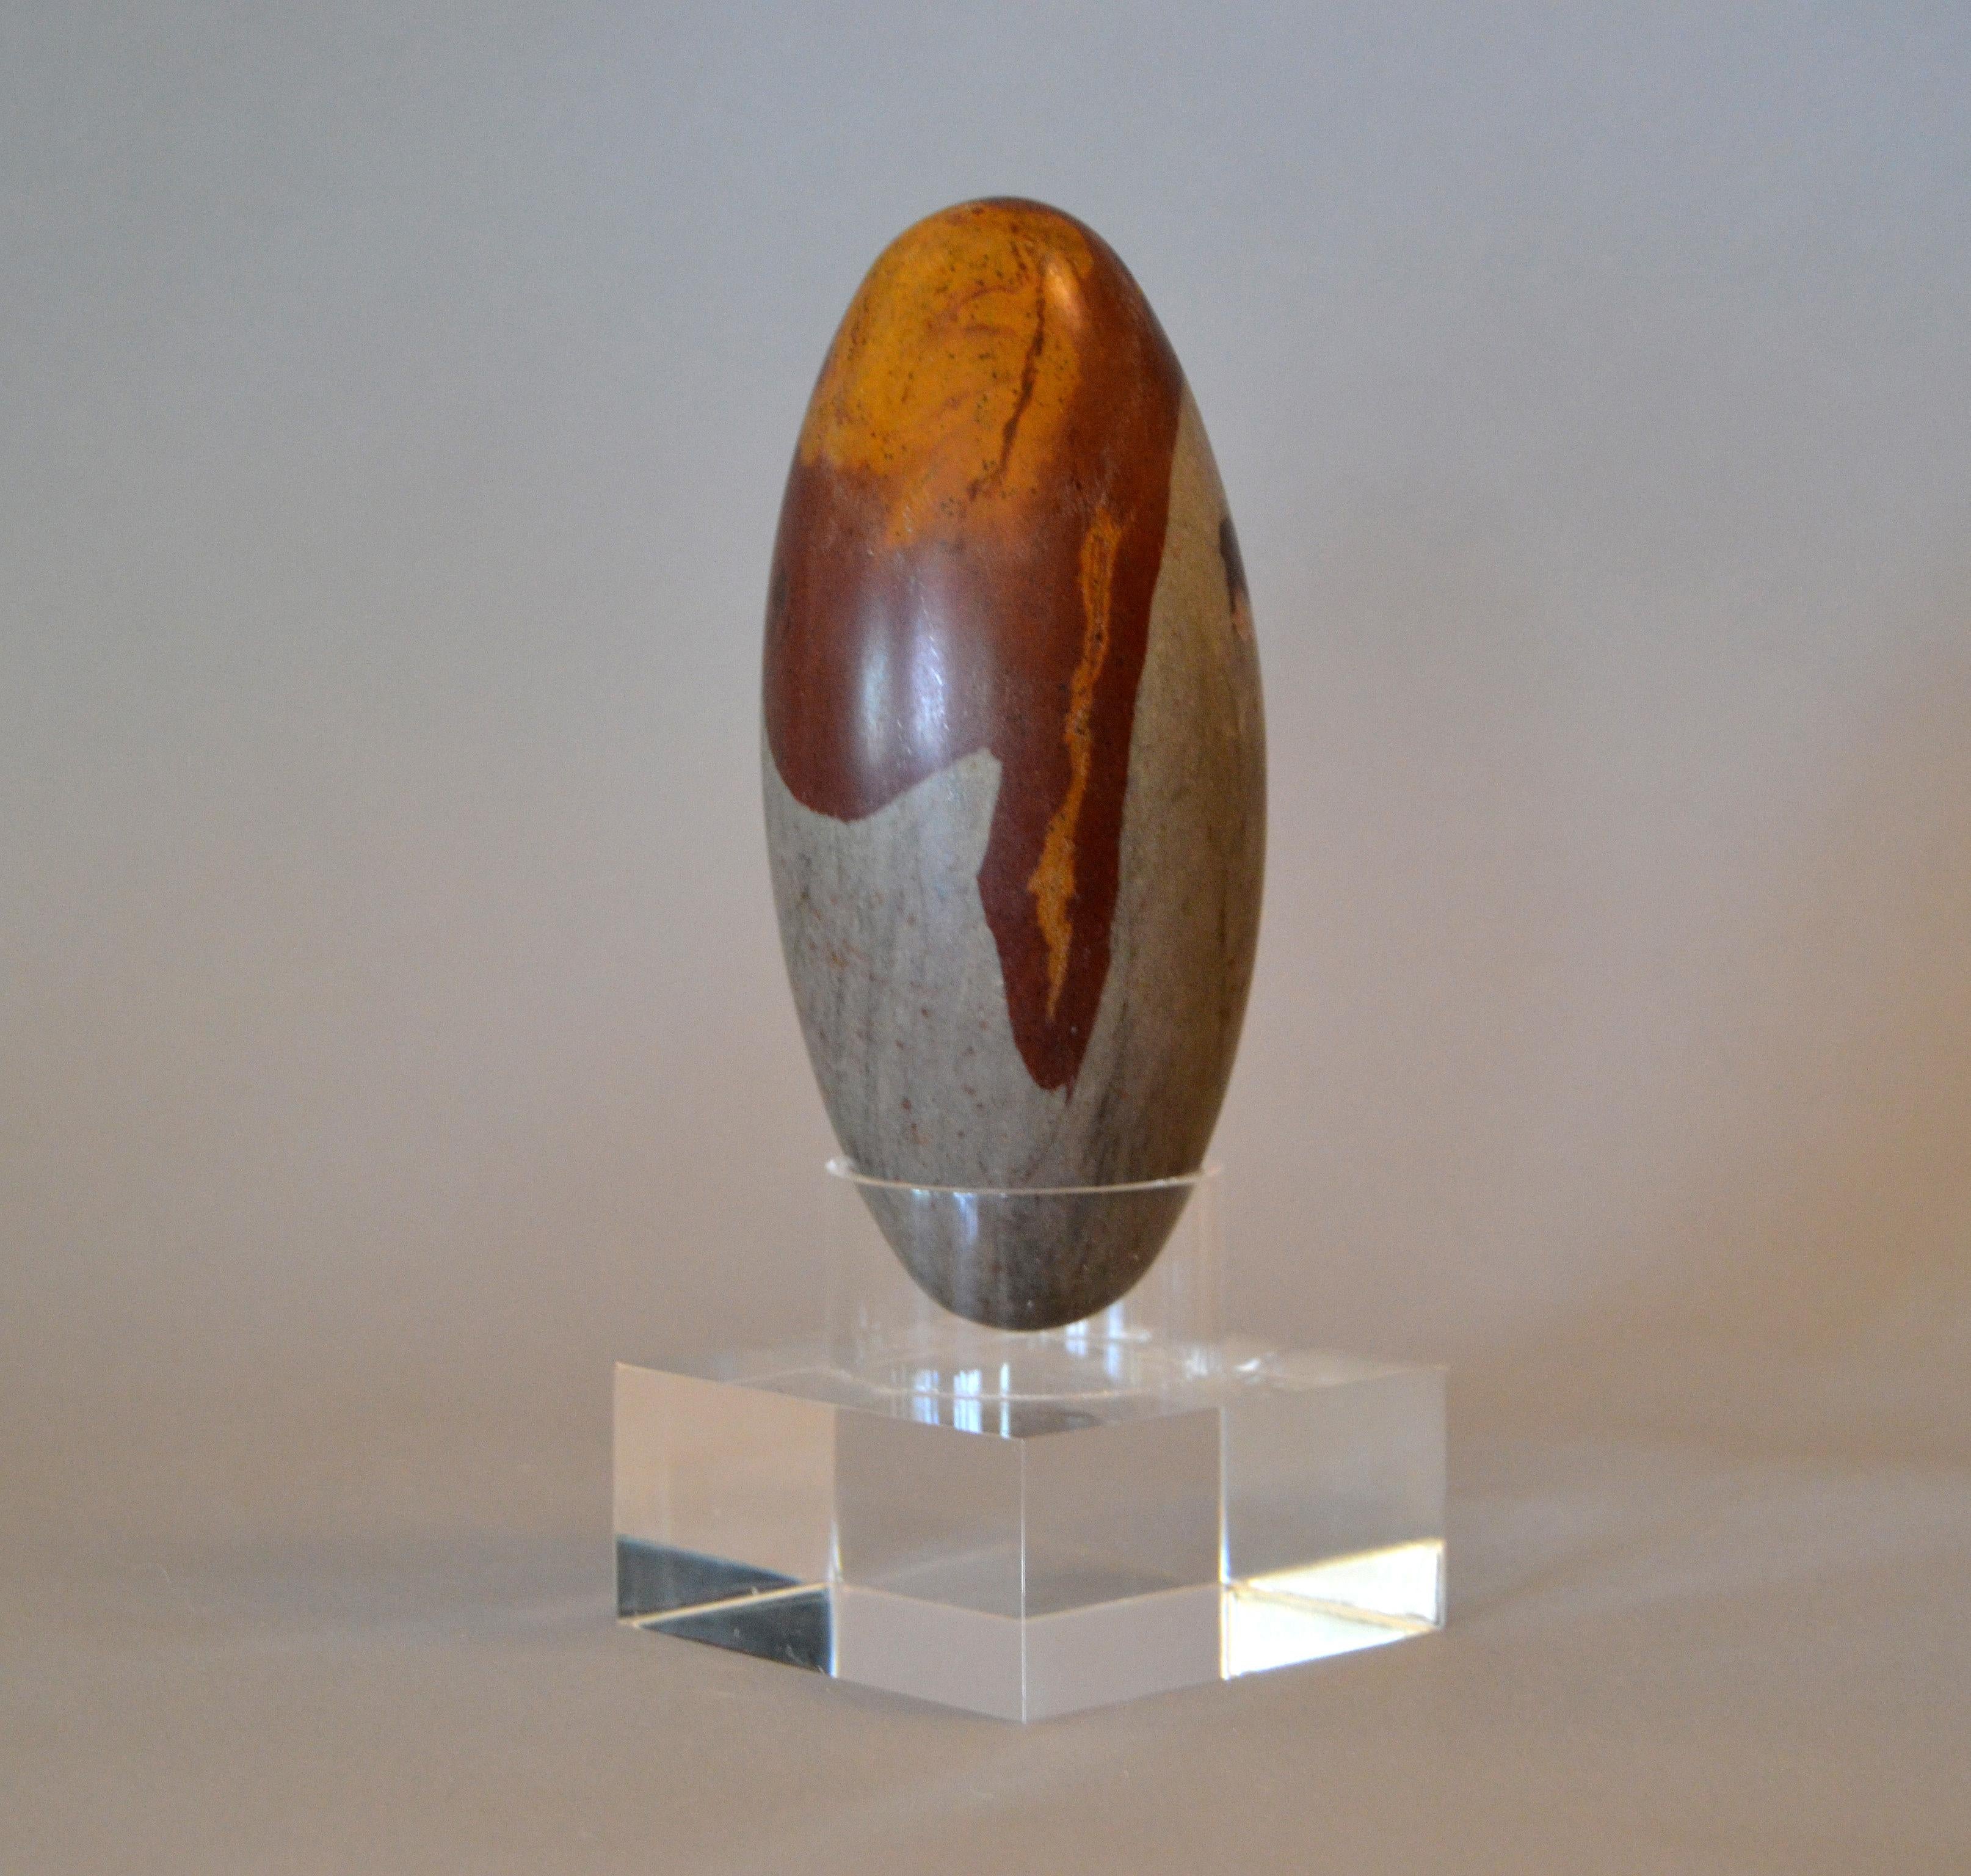 Antique Indian Tantric Shiva Lingam Stone on a clear Lucite stand.
Each stone has a marvelous grain pattern.
Just lovely and a great gift for this holiday season.